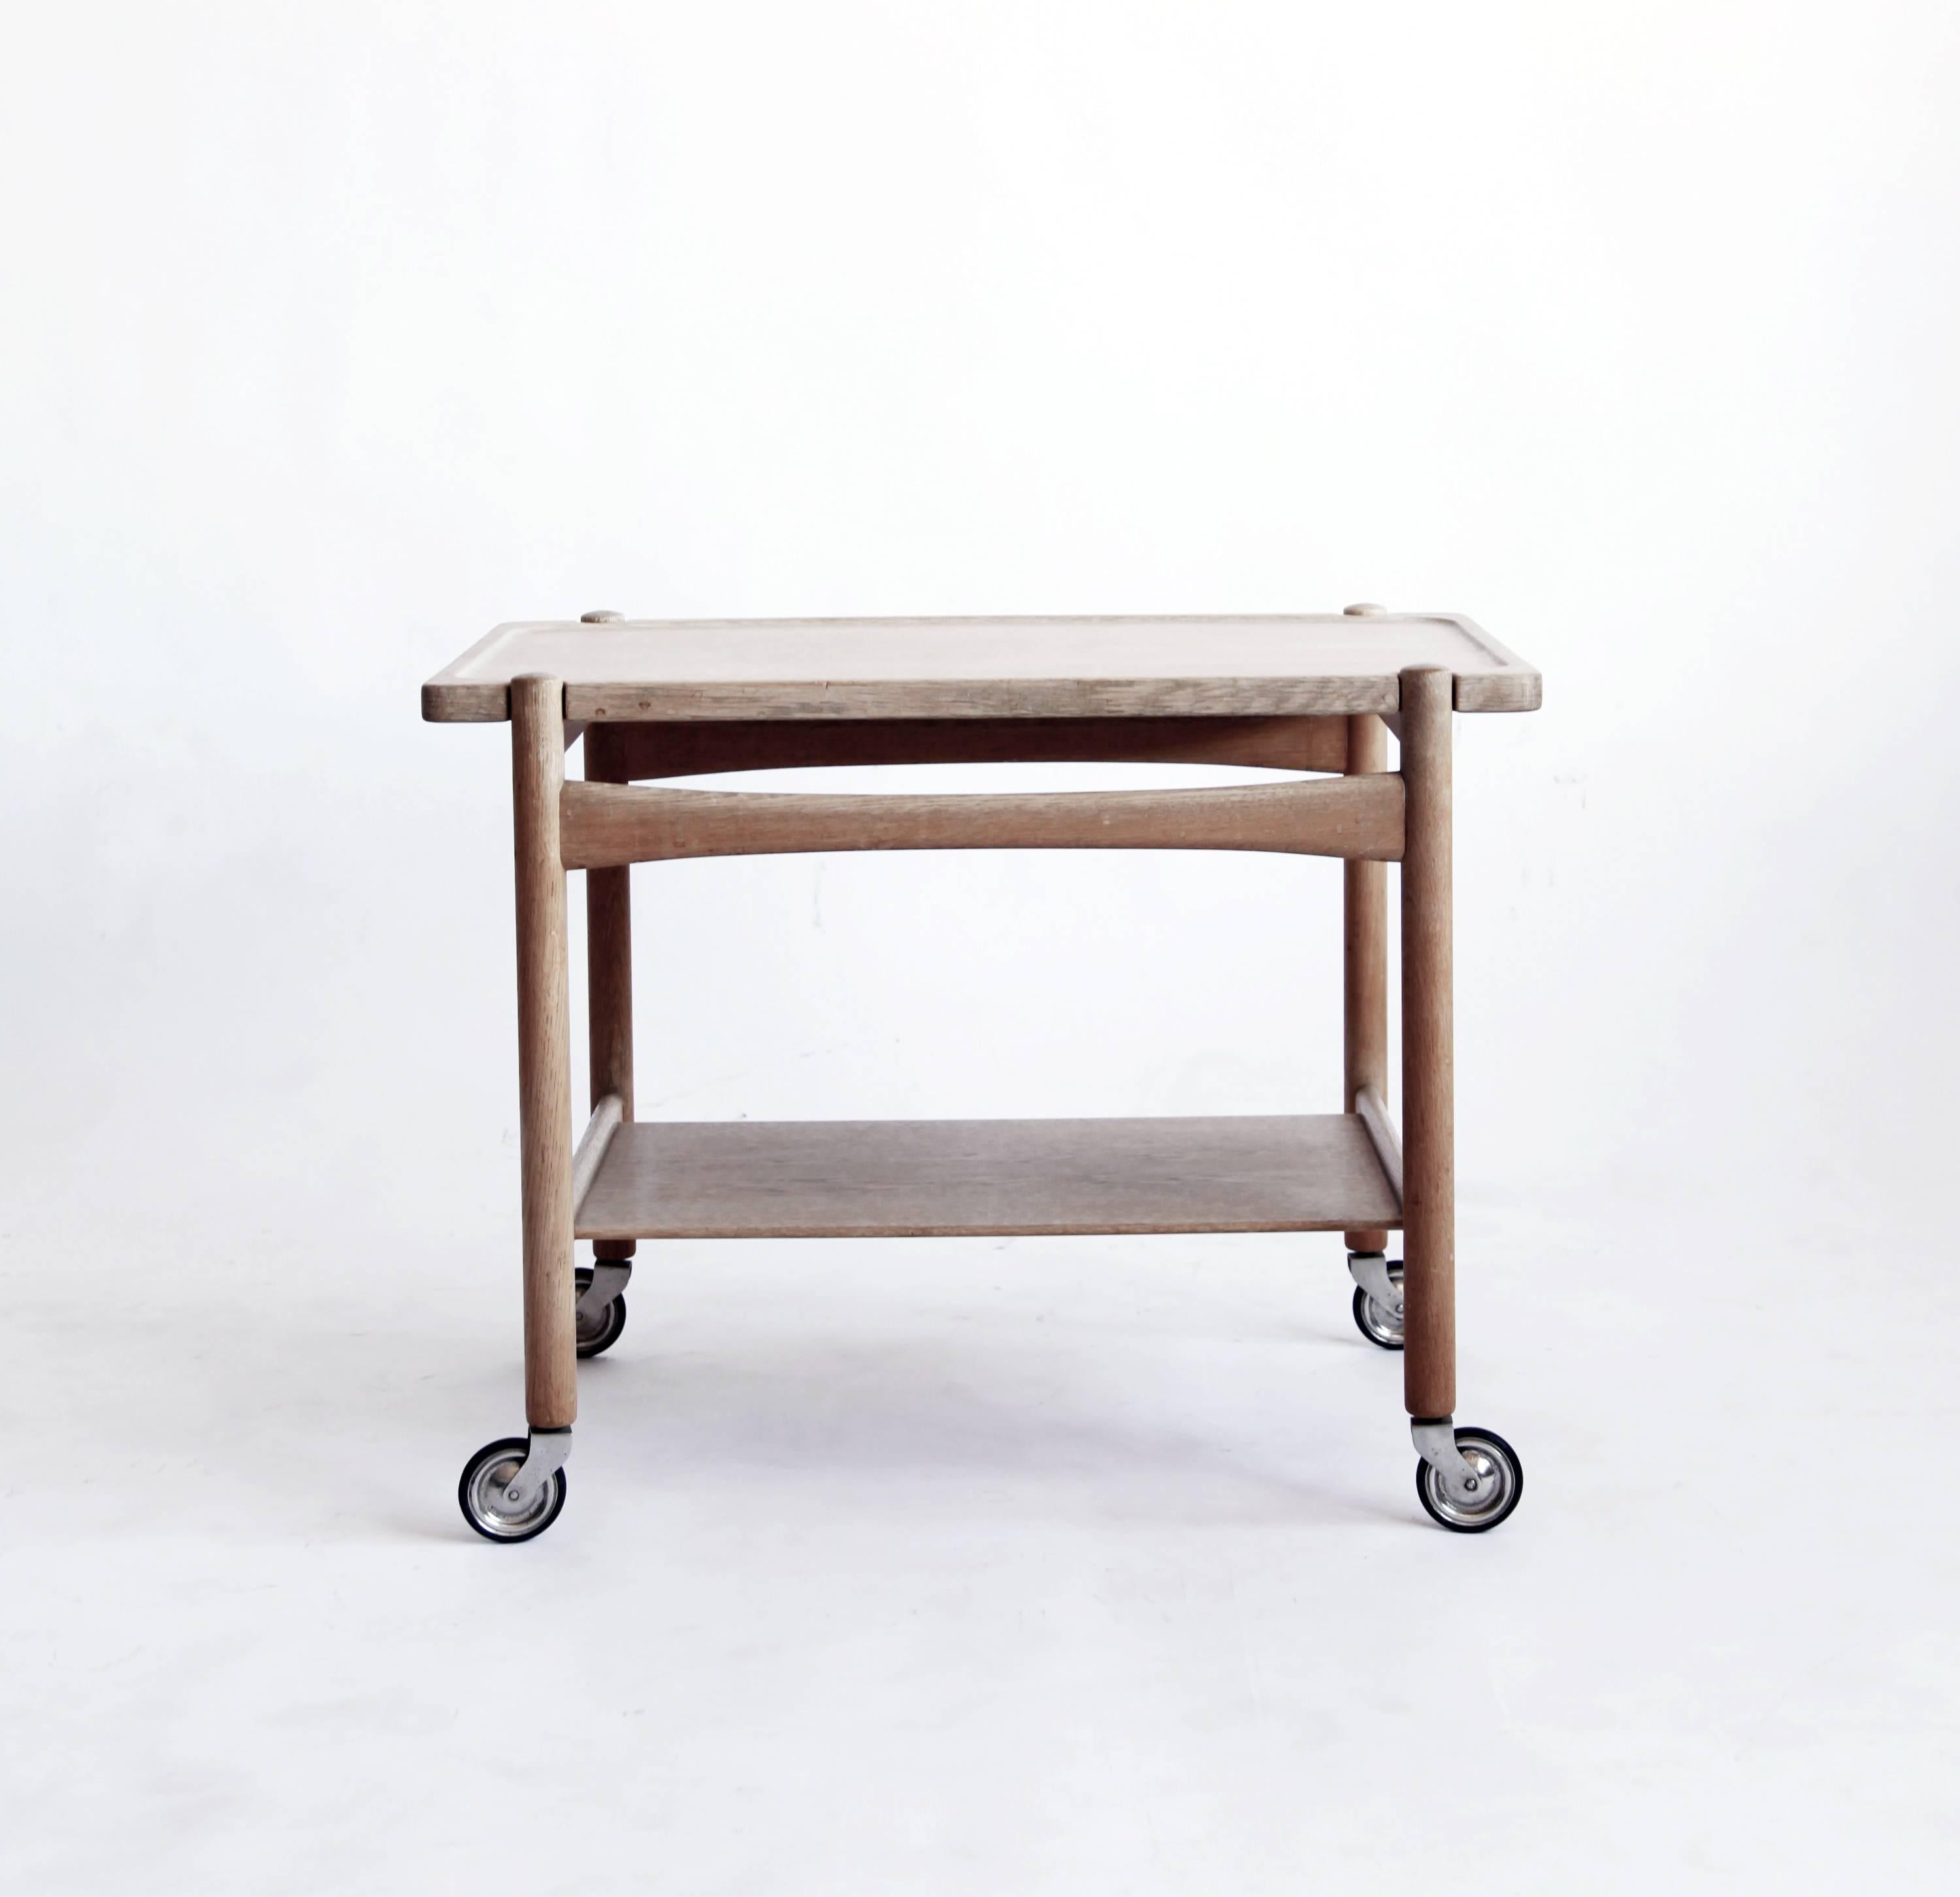 Andreas Tuck was a Danish cabinetmaker primarily active in the 1950s and 1960s, and Hans Wegner was their chief designer. Together, they produced a range of tables that embody a Minimalist Nordic elegance.

This pale oak bar cart has a removable